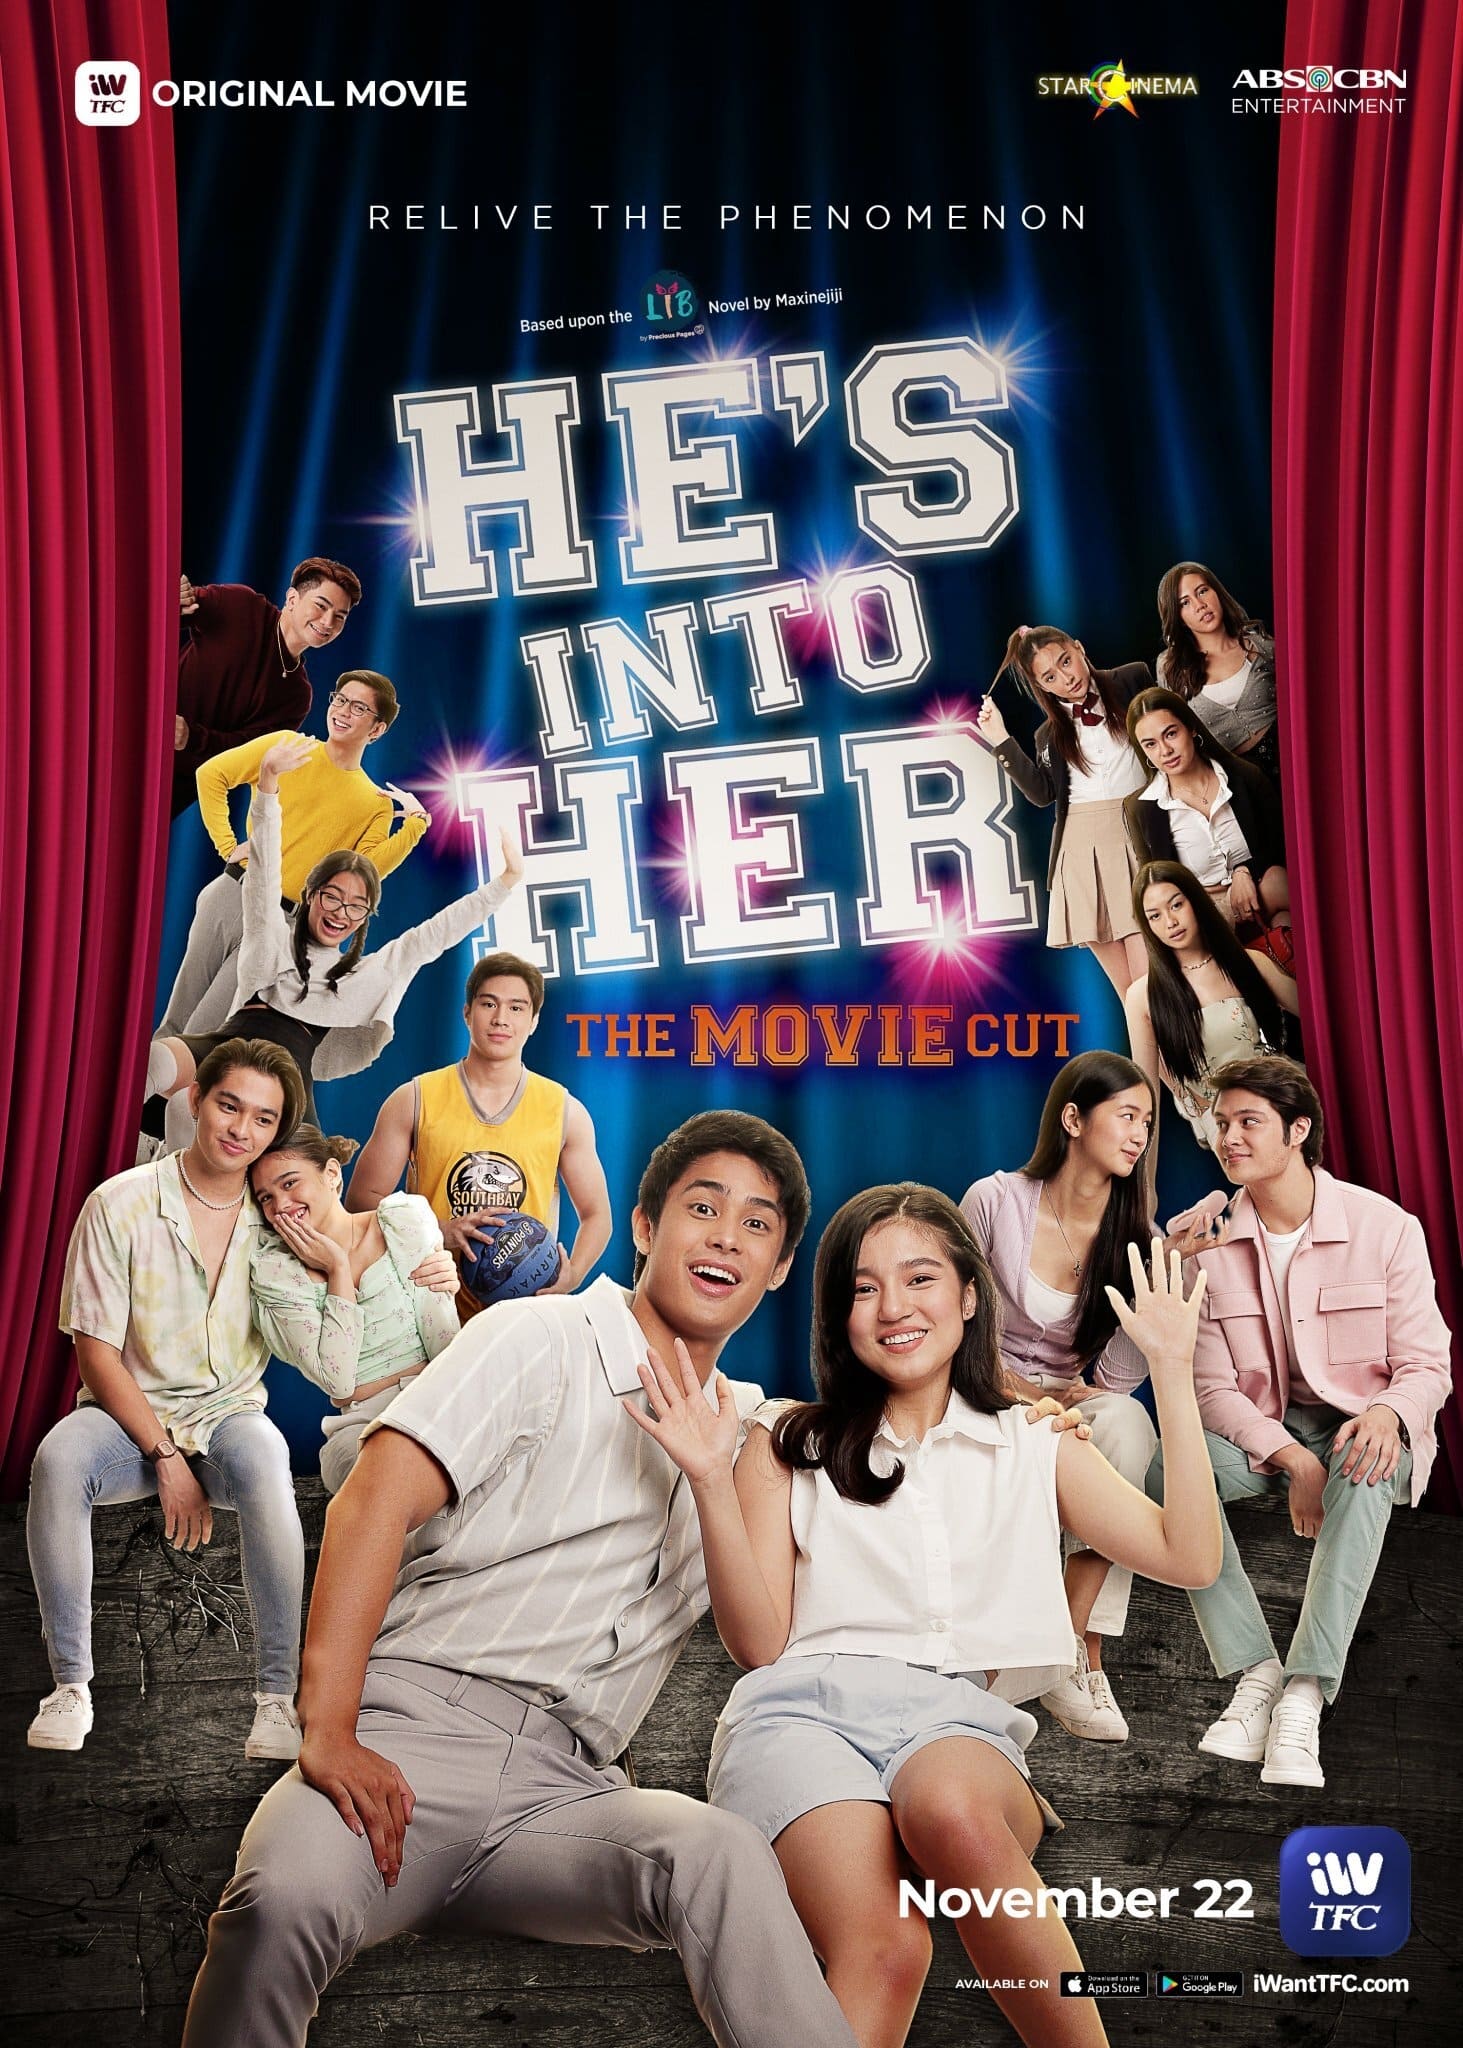 He's Into Her: The Movie Cut film